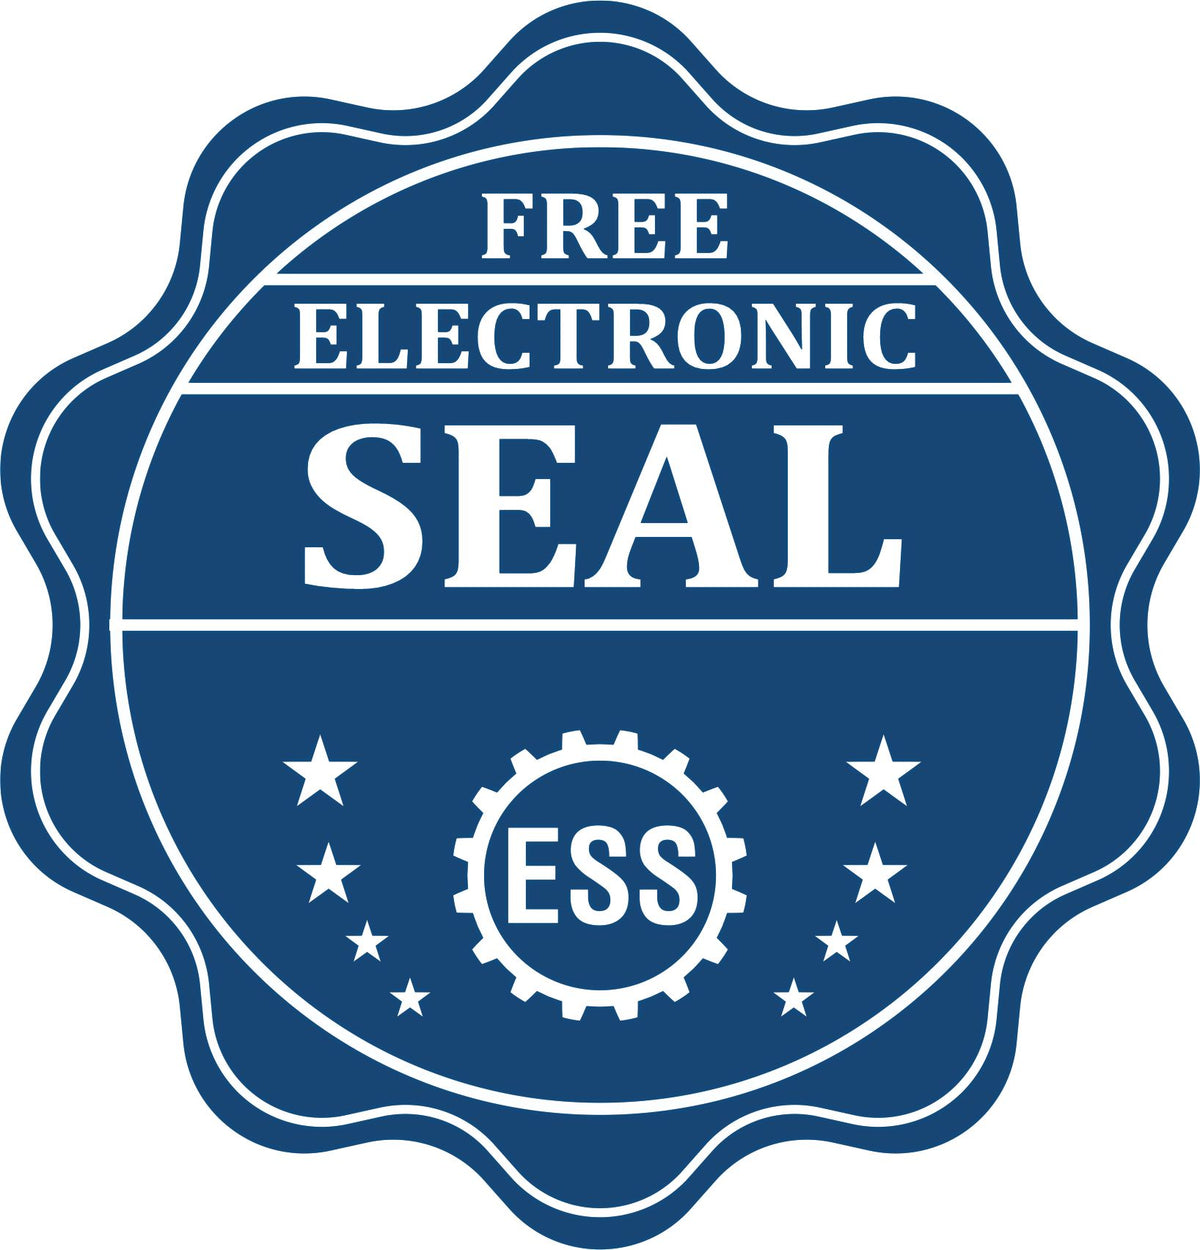 A badge showing a free electronic seal for the Extended Long Reach Missouri Surveyor Embosser with stars and the ESS gear on the emblem.